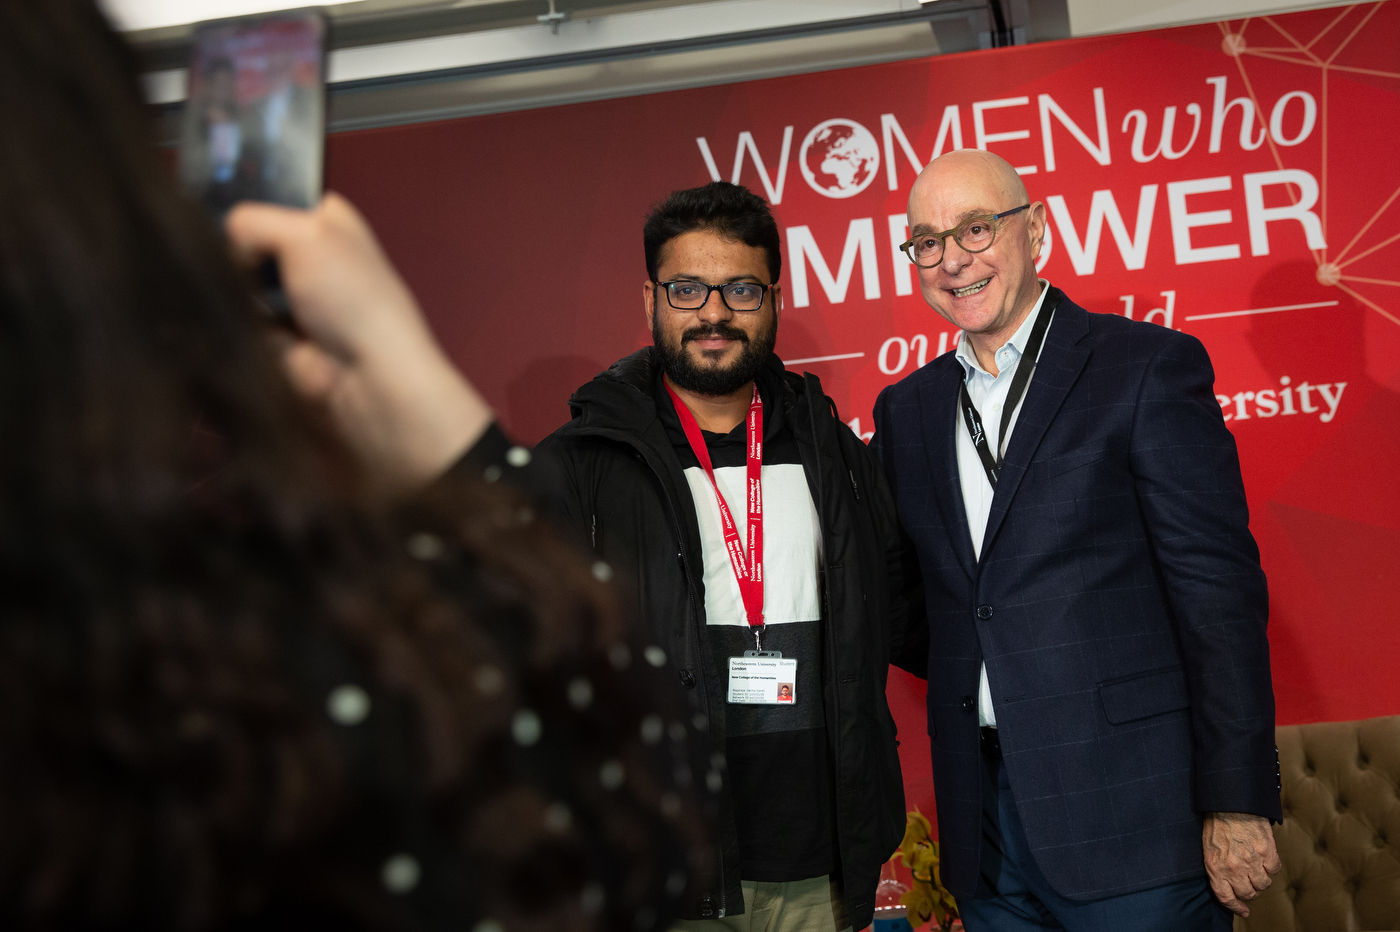 president joseph aoun posing for a photo with an attendee of women who empower event at northeastern university london